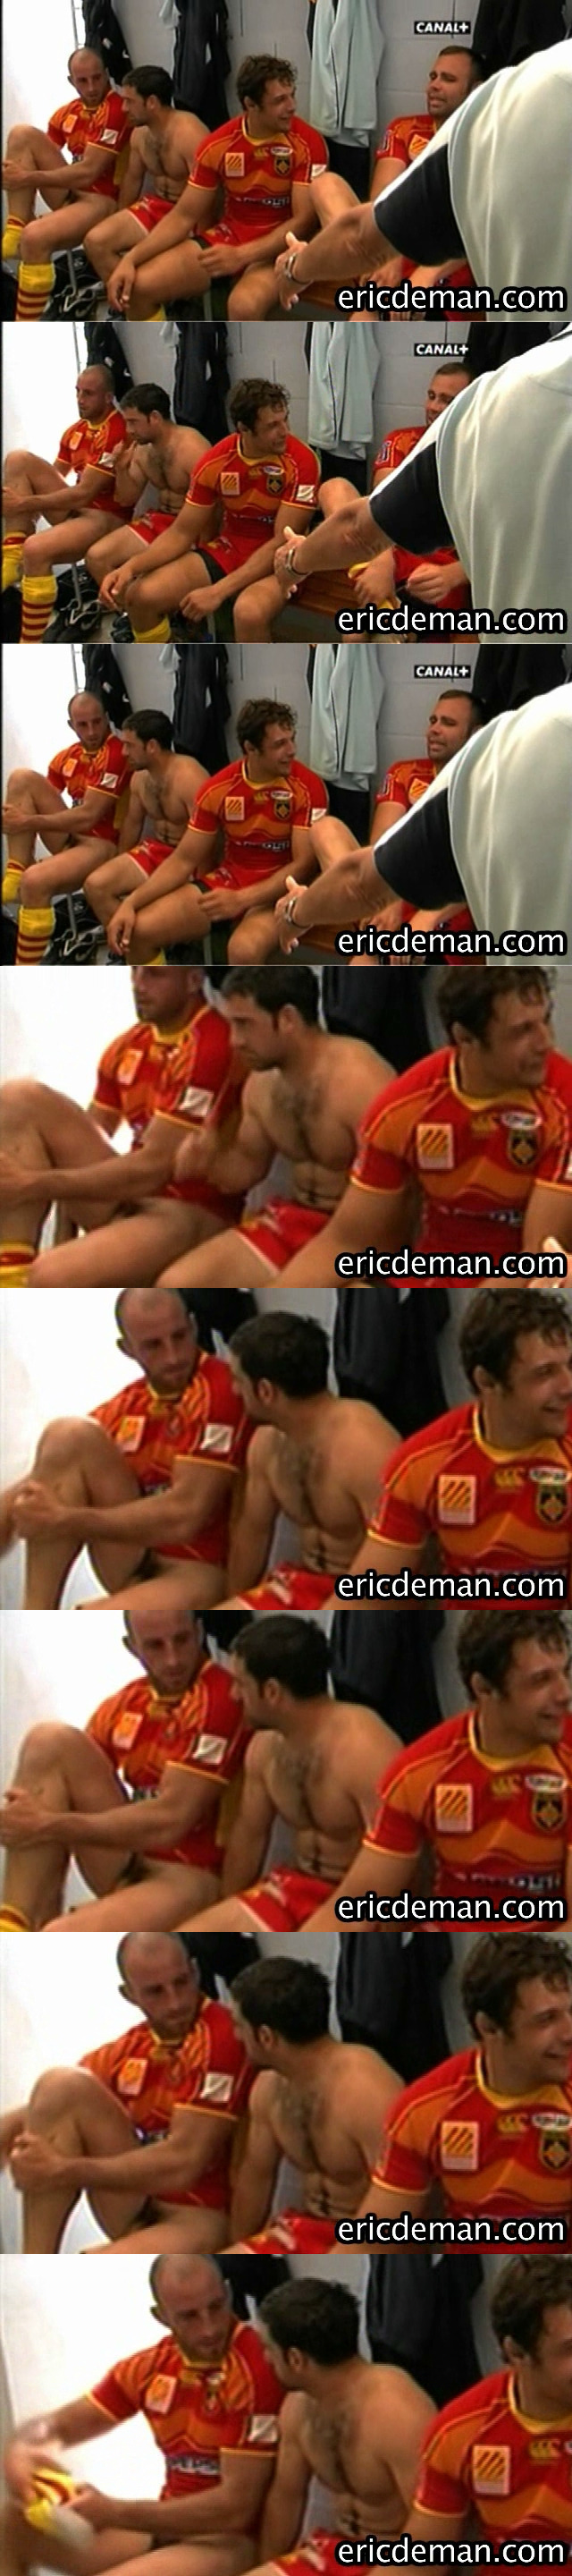 French rugby player Oliver Olibeau accidentally caught naked in locker room